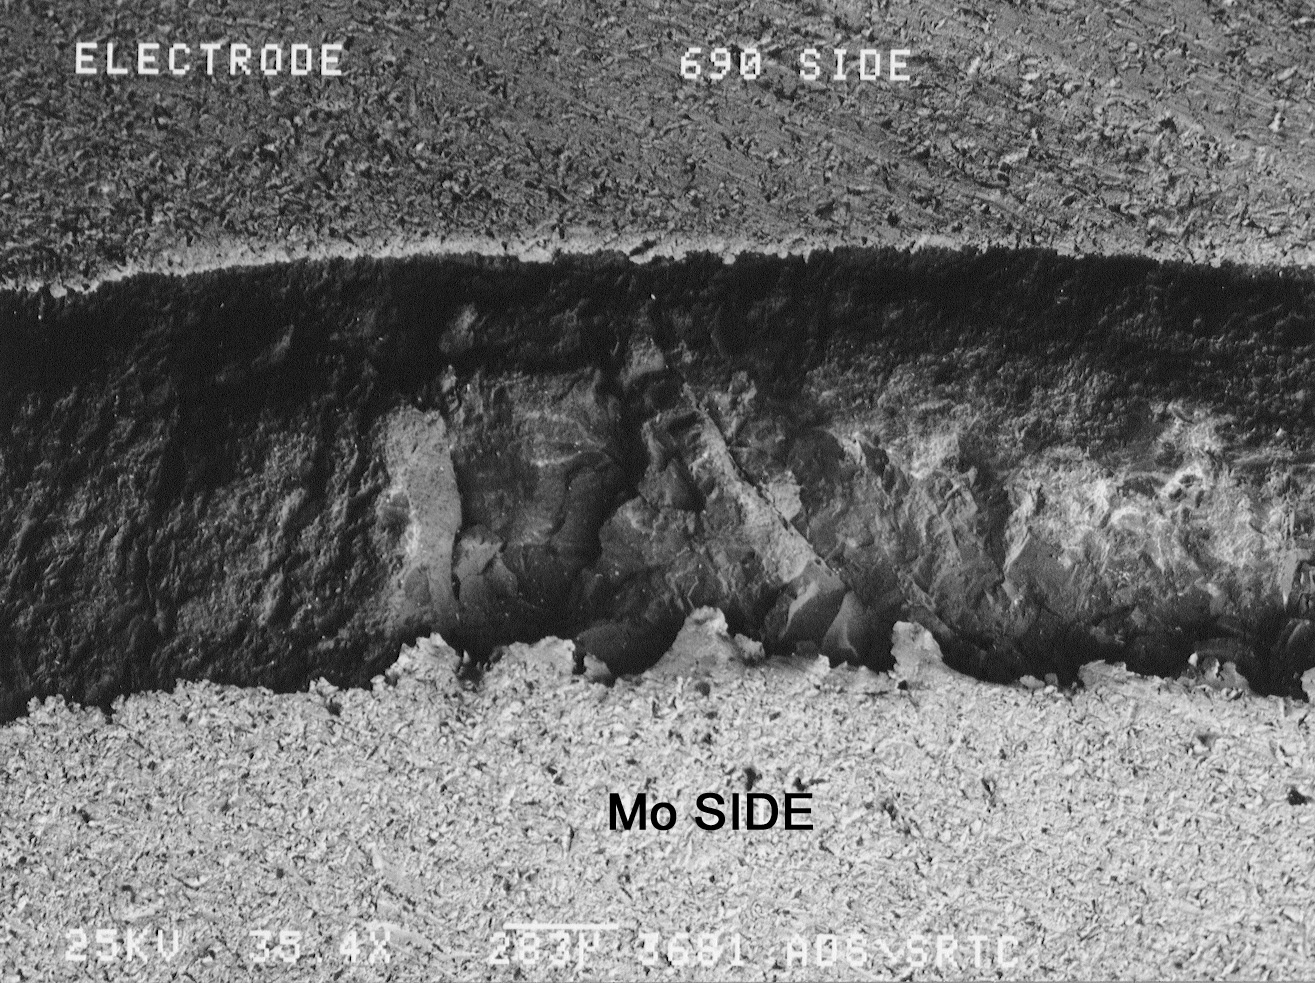 Figure 5b. SEM photograph showing glass layer. Alloying between the molybdenum and nickel was not present in this region.